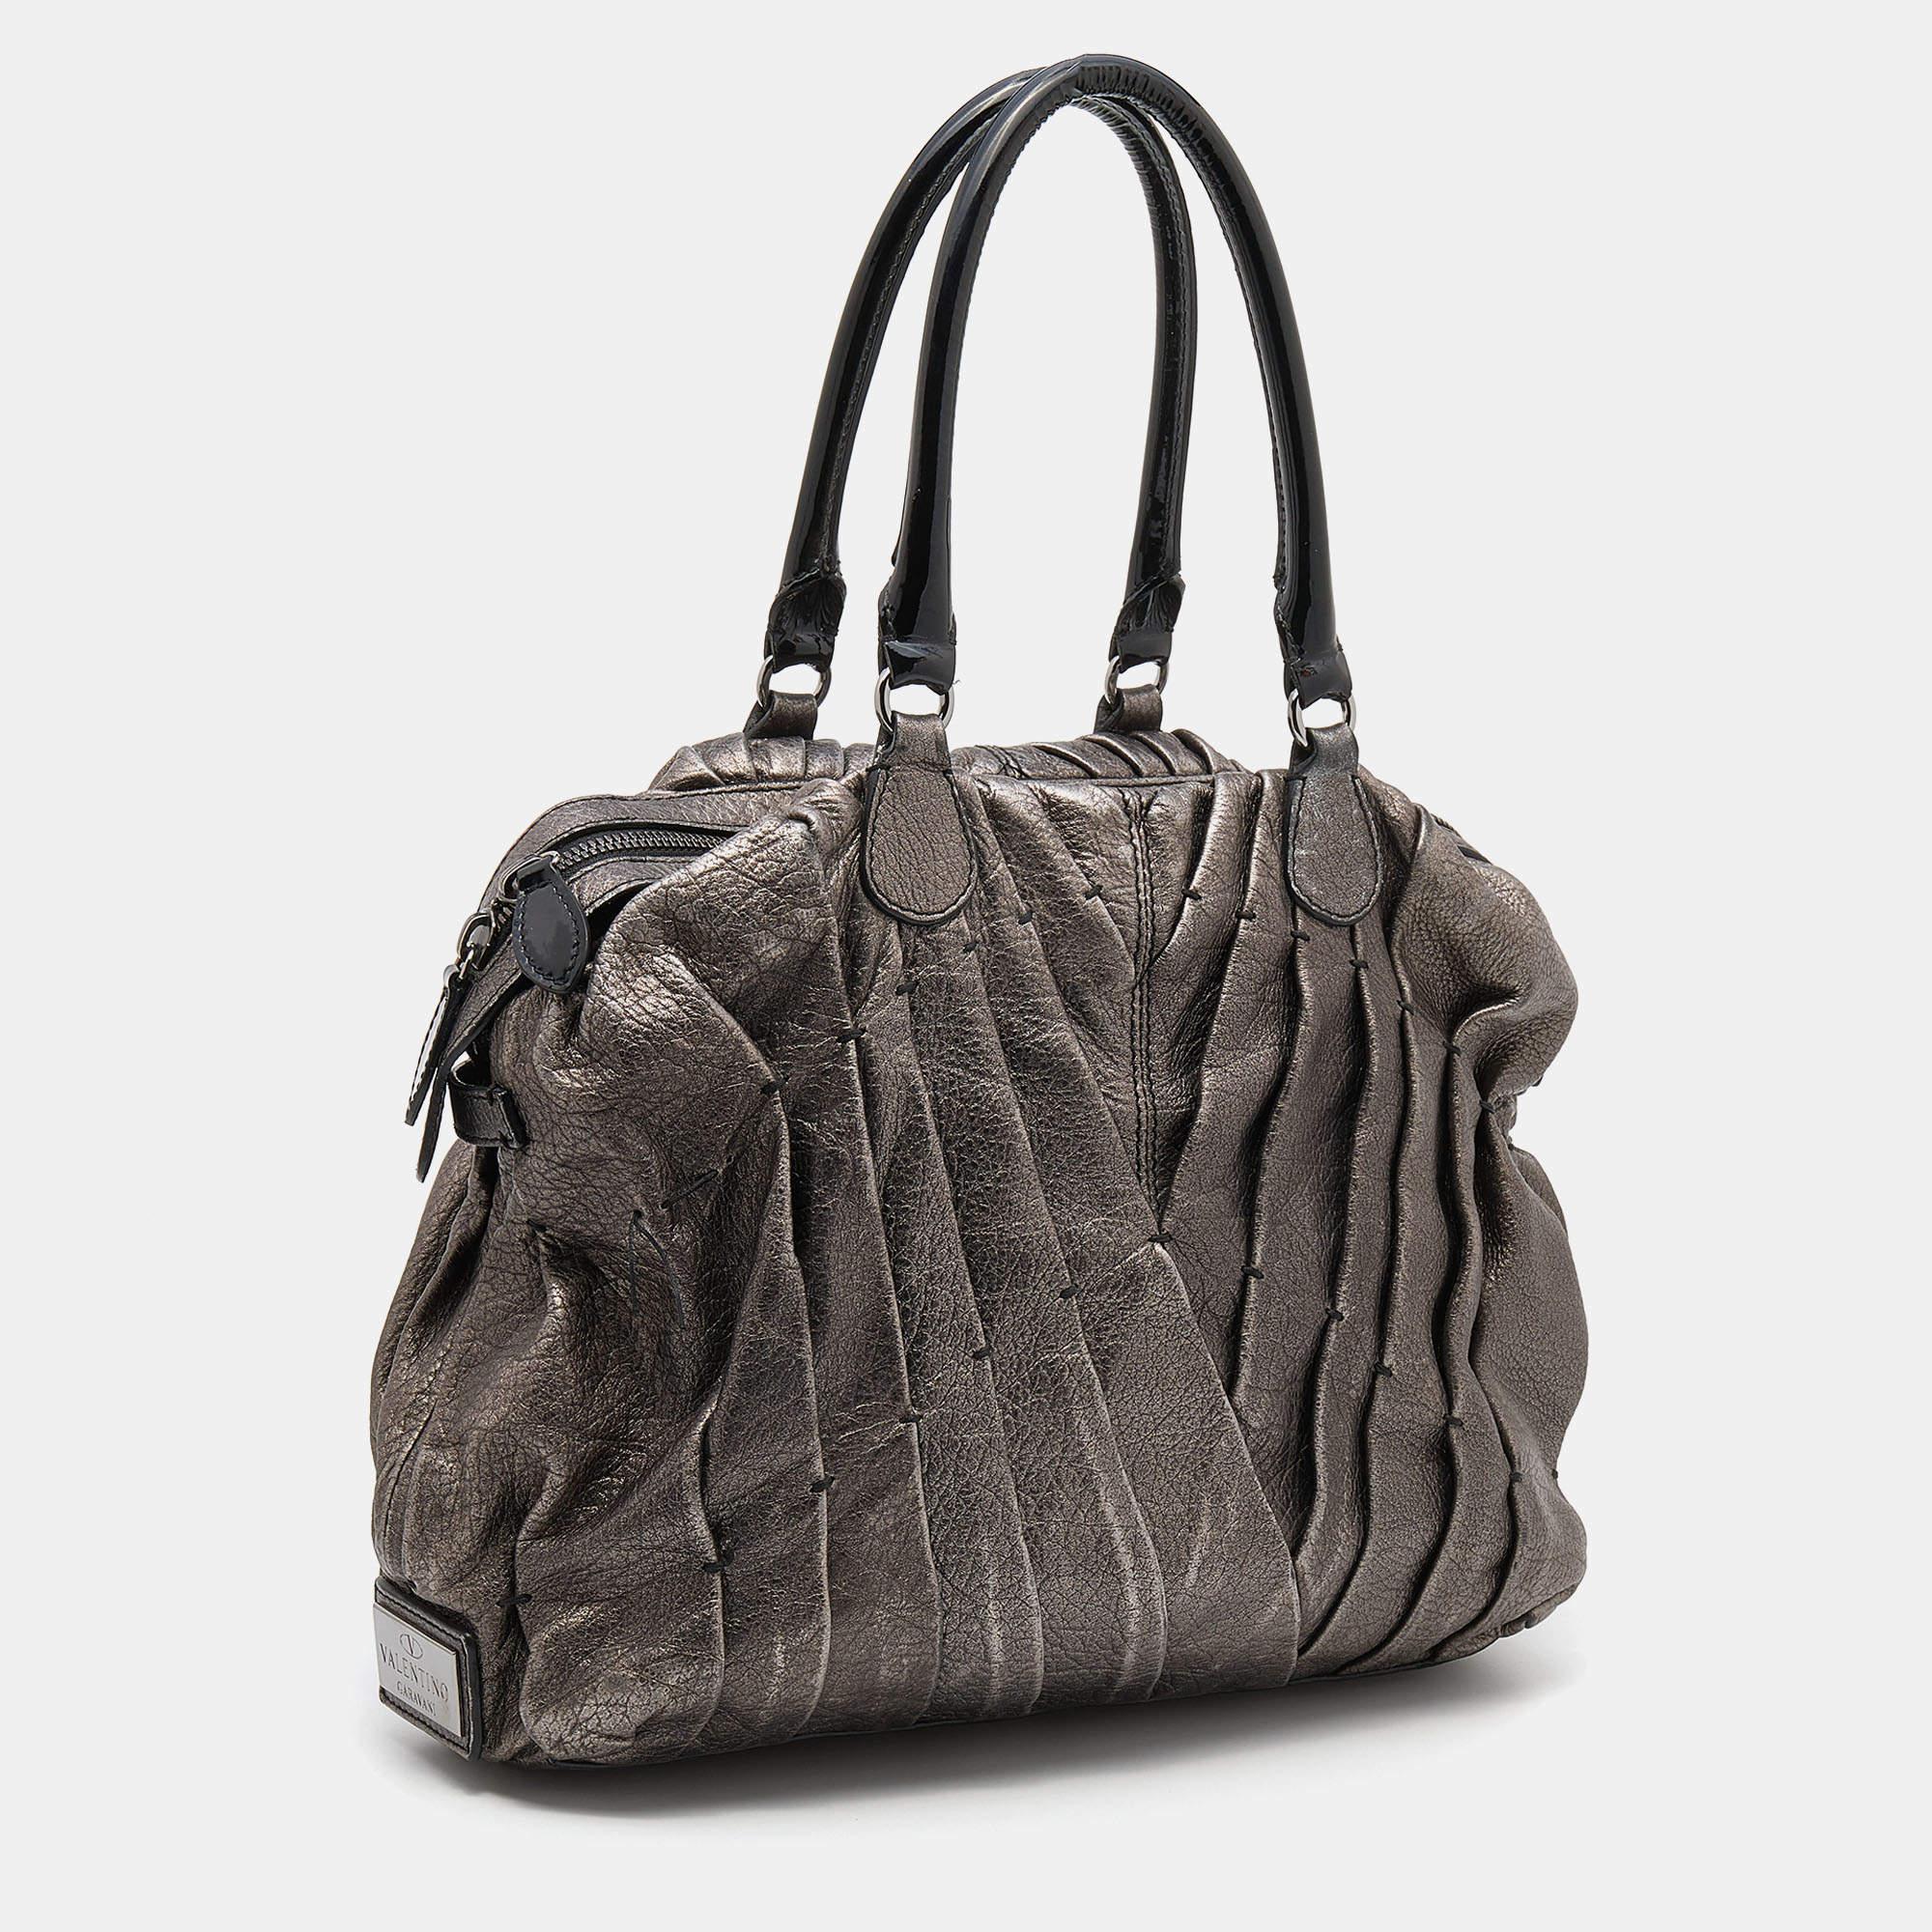 A timeless creation from the house of Valentino, this shopper tote is full of charm. Crafted from metallic grey leather, it features a pintucked exterior and silver-tone hardware. The tote comes with two handles and its well-lined interior will